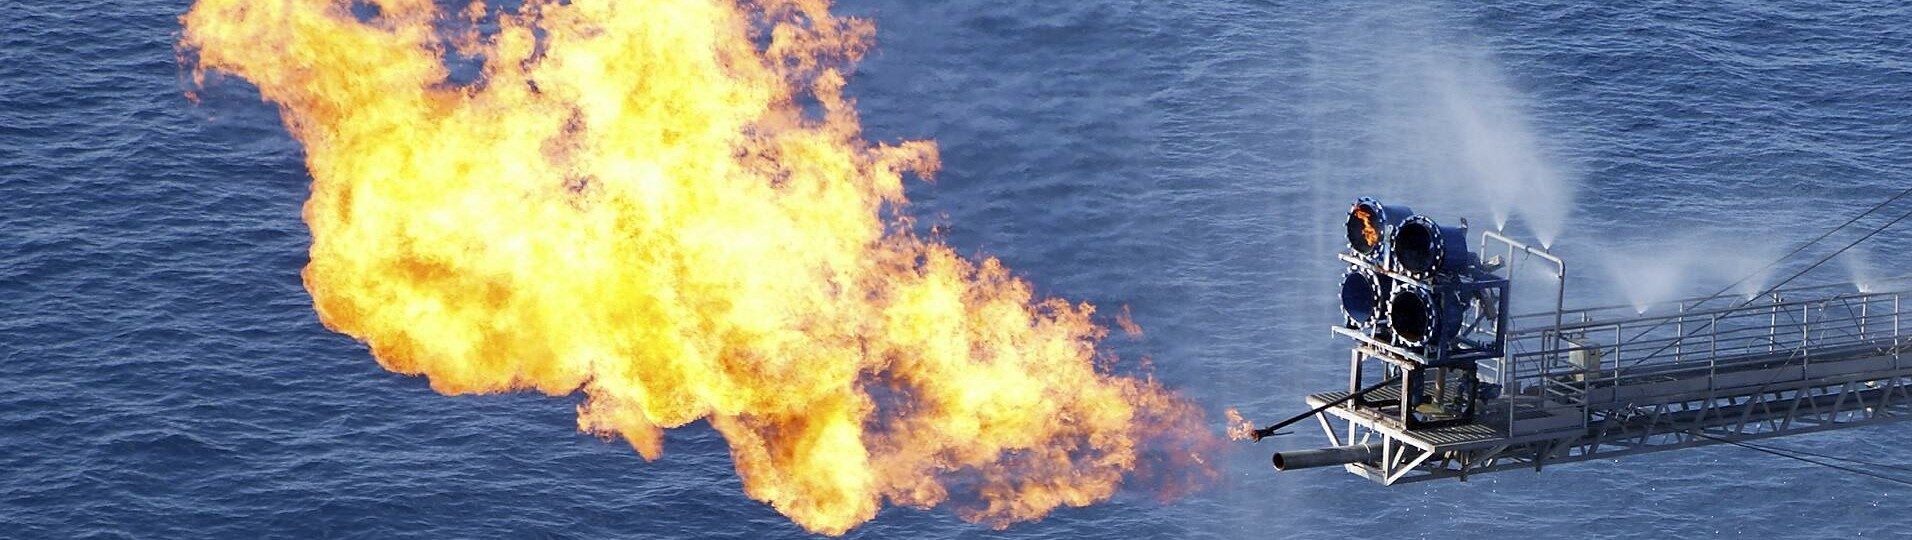 oil rig flaring during well testing operations